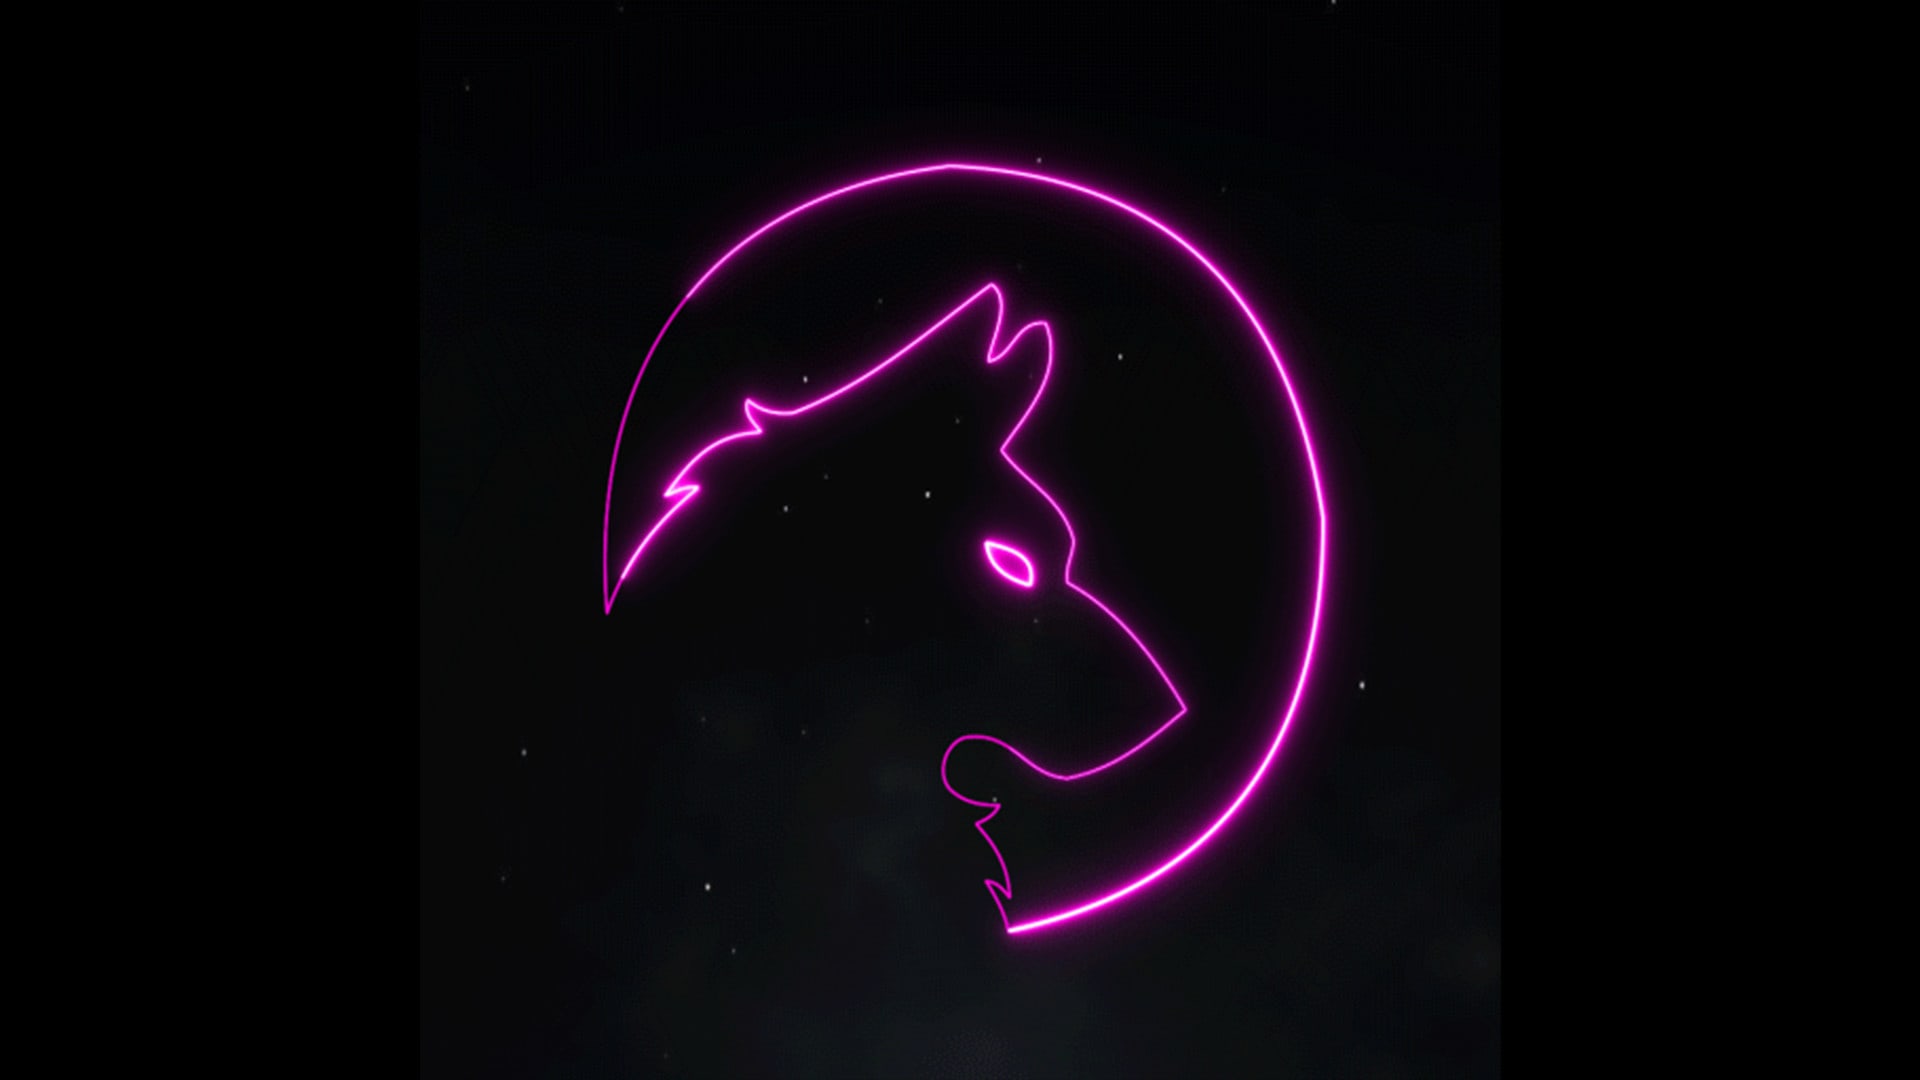 Create this cool neon animation discord avatar by Hogwash123